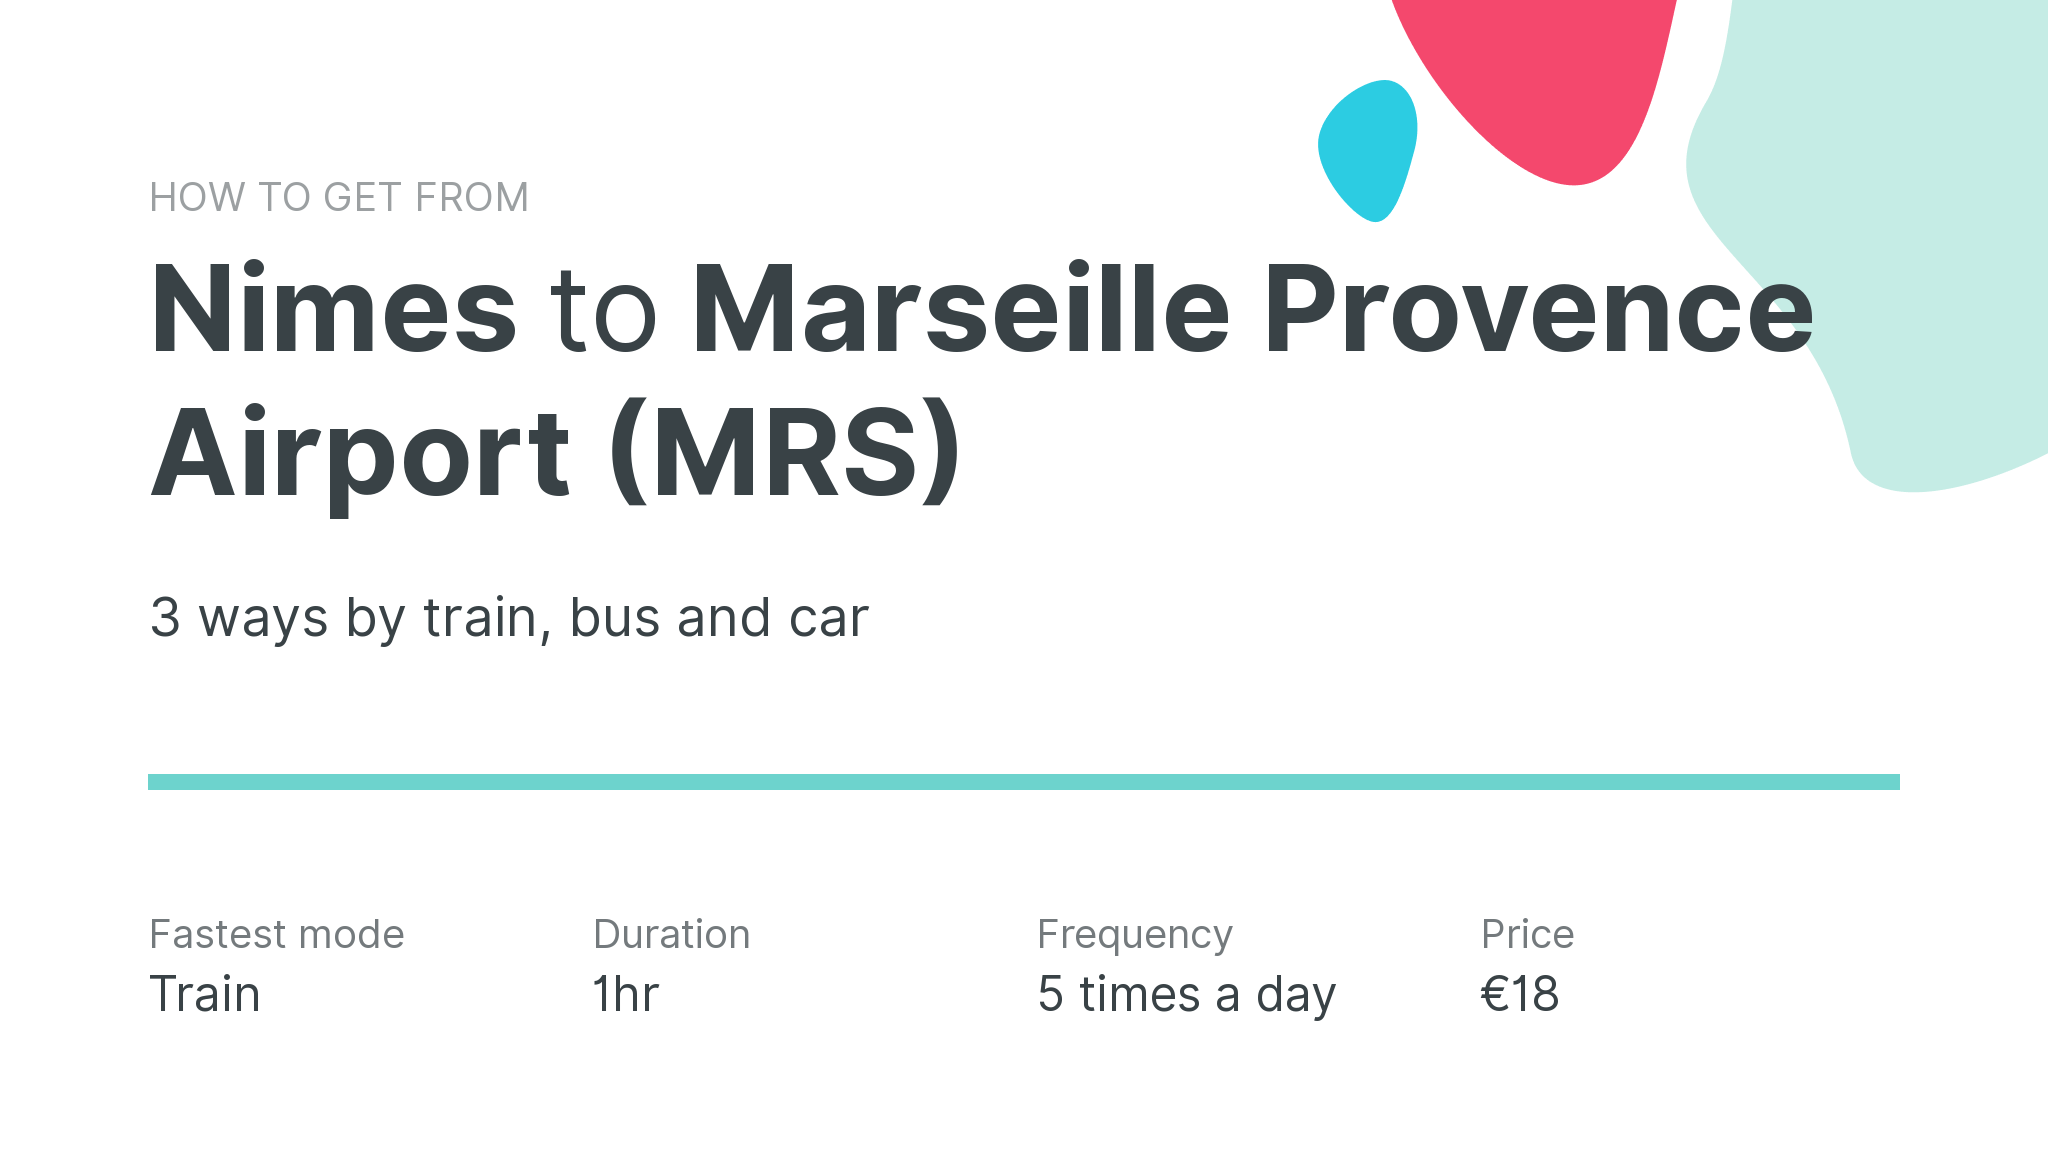 How do I get from Nimes to Marseille Provence Airport (MRS)